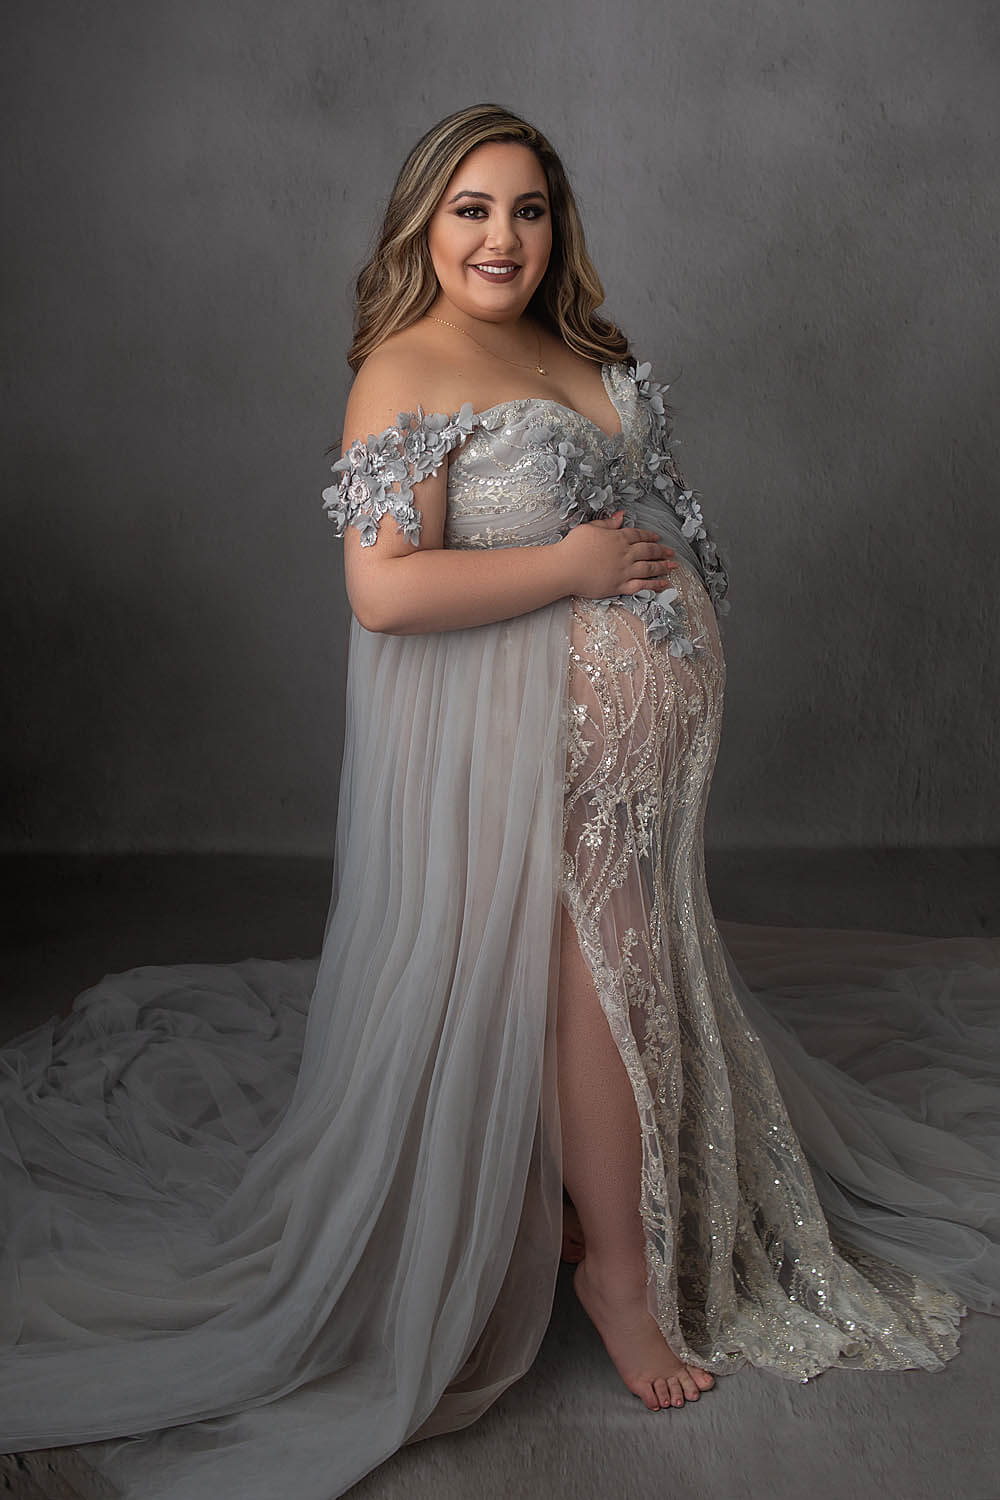 pregnant woman wearing silver gown for materinty photo fort lauderdale